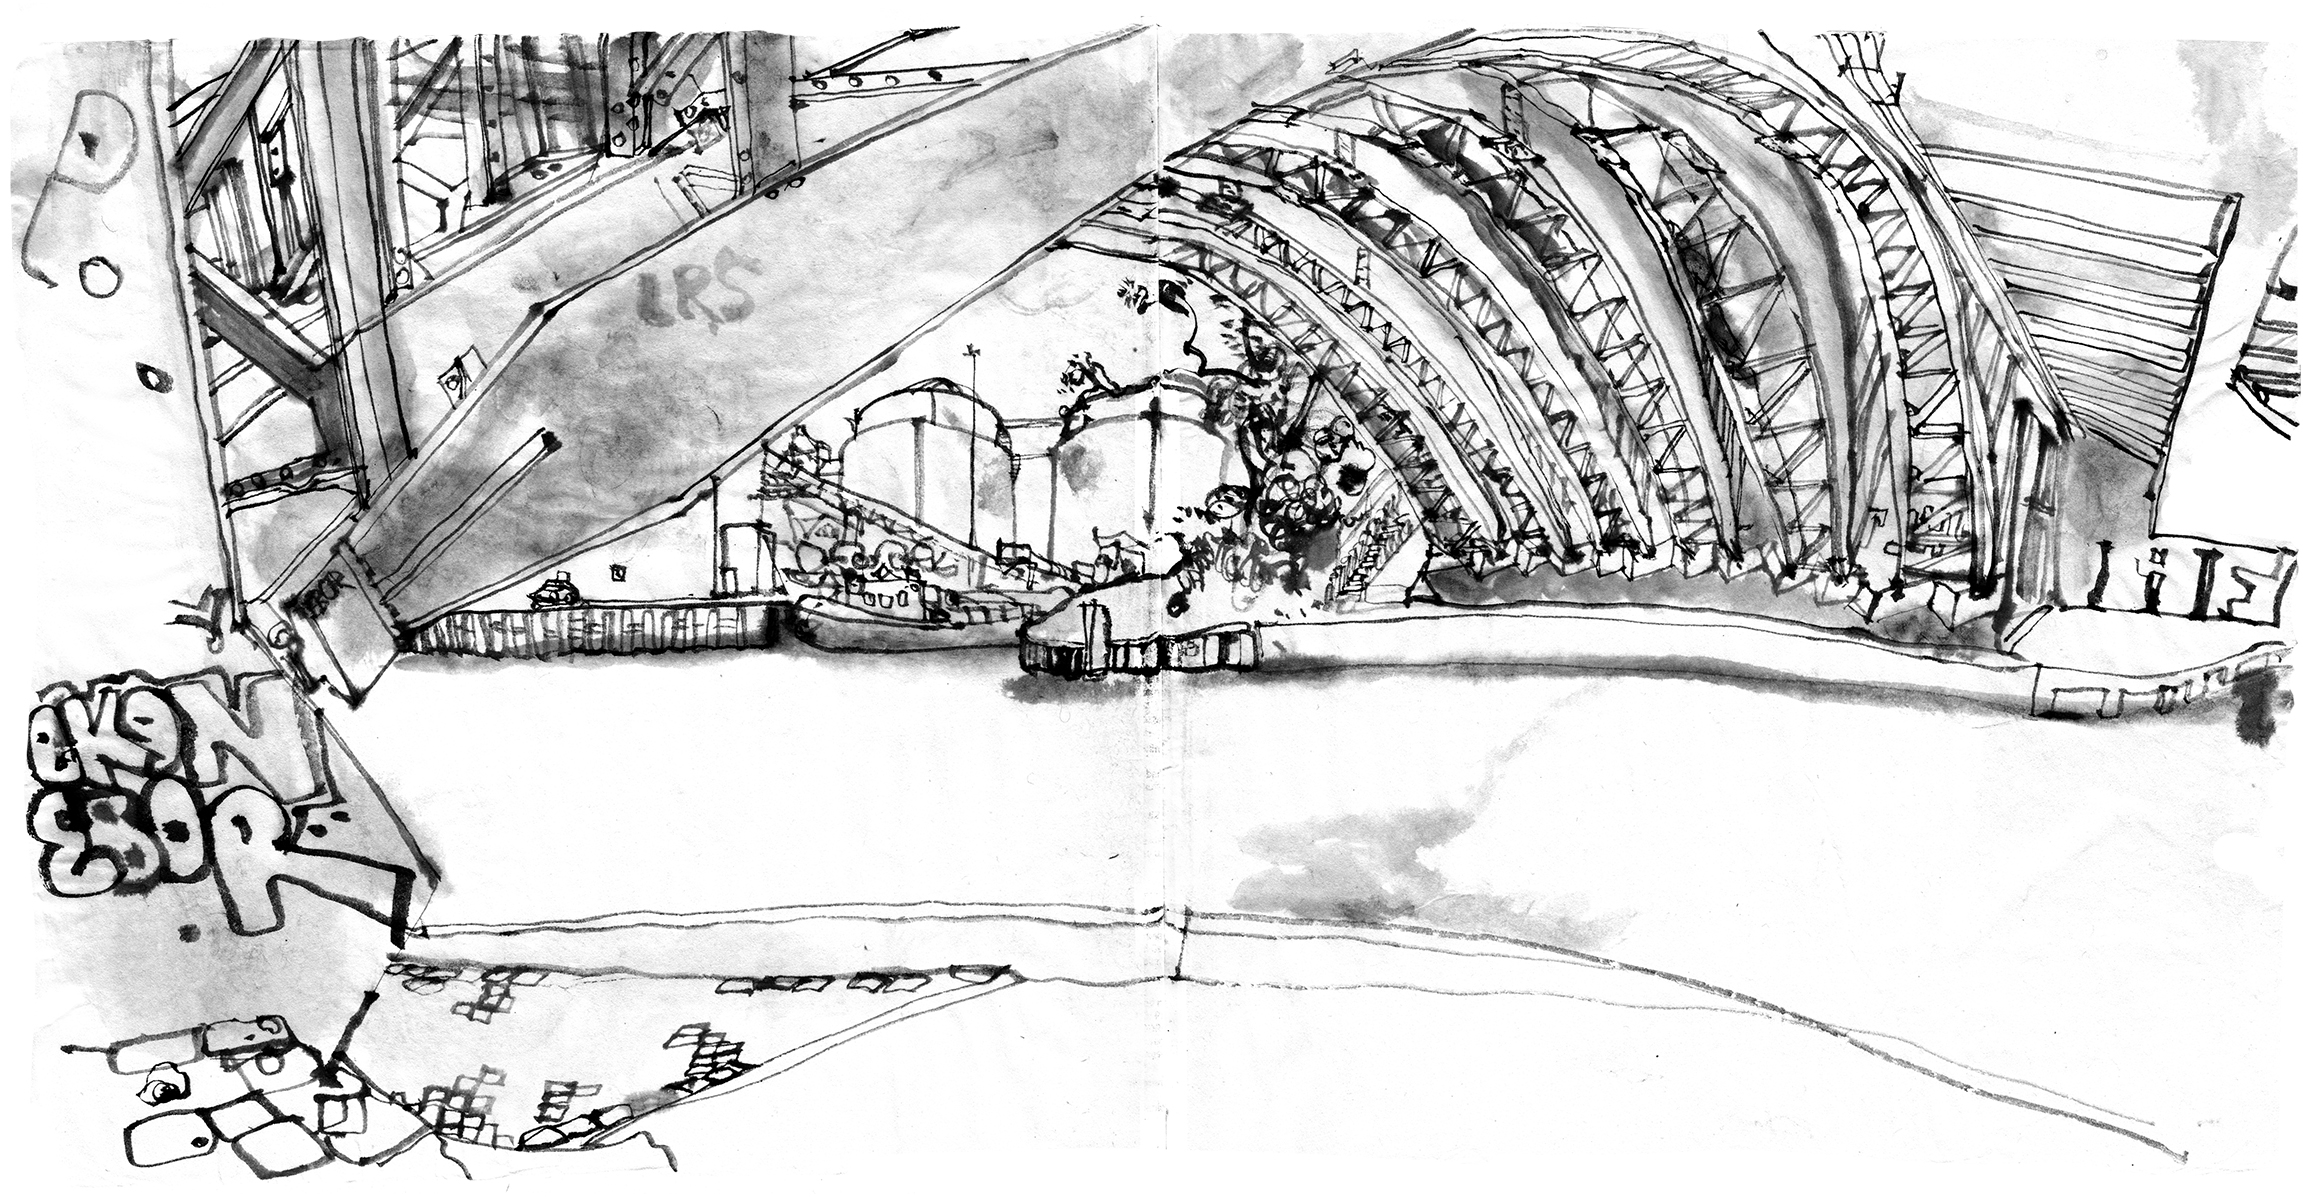 ink drawing from a bridge over a canal, senn from below, by the canal